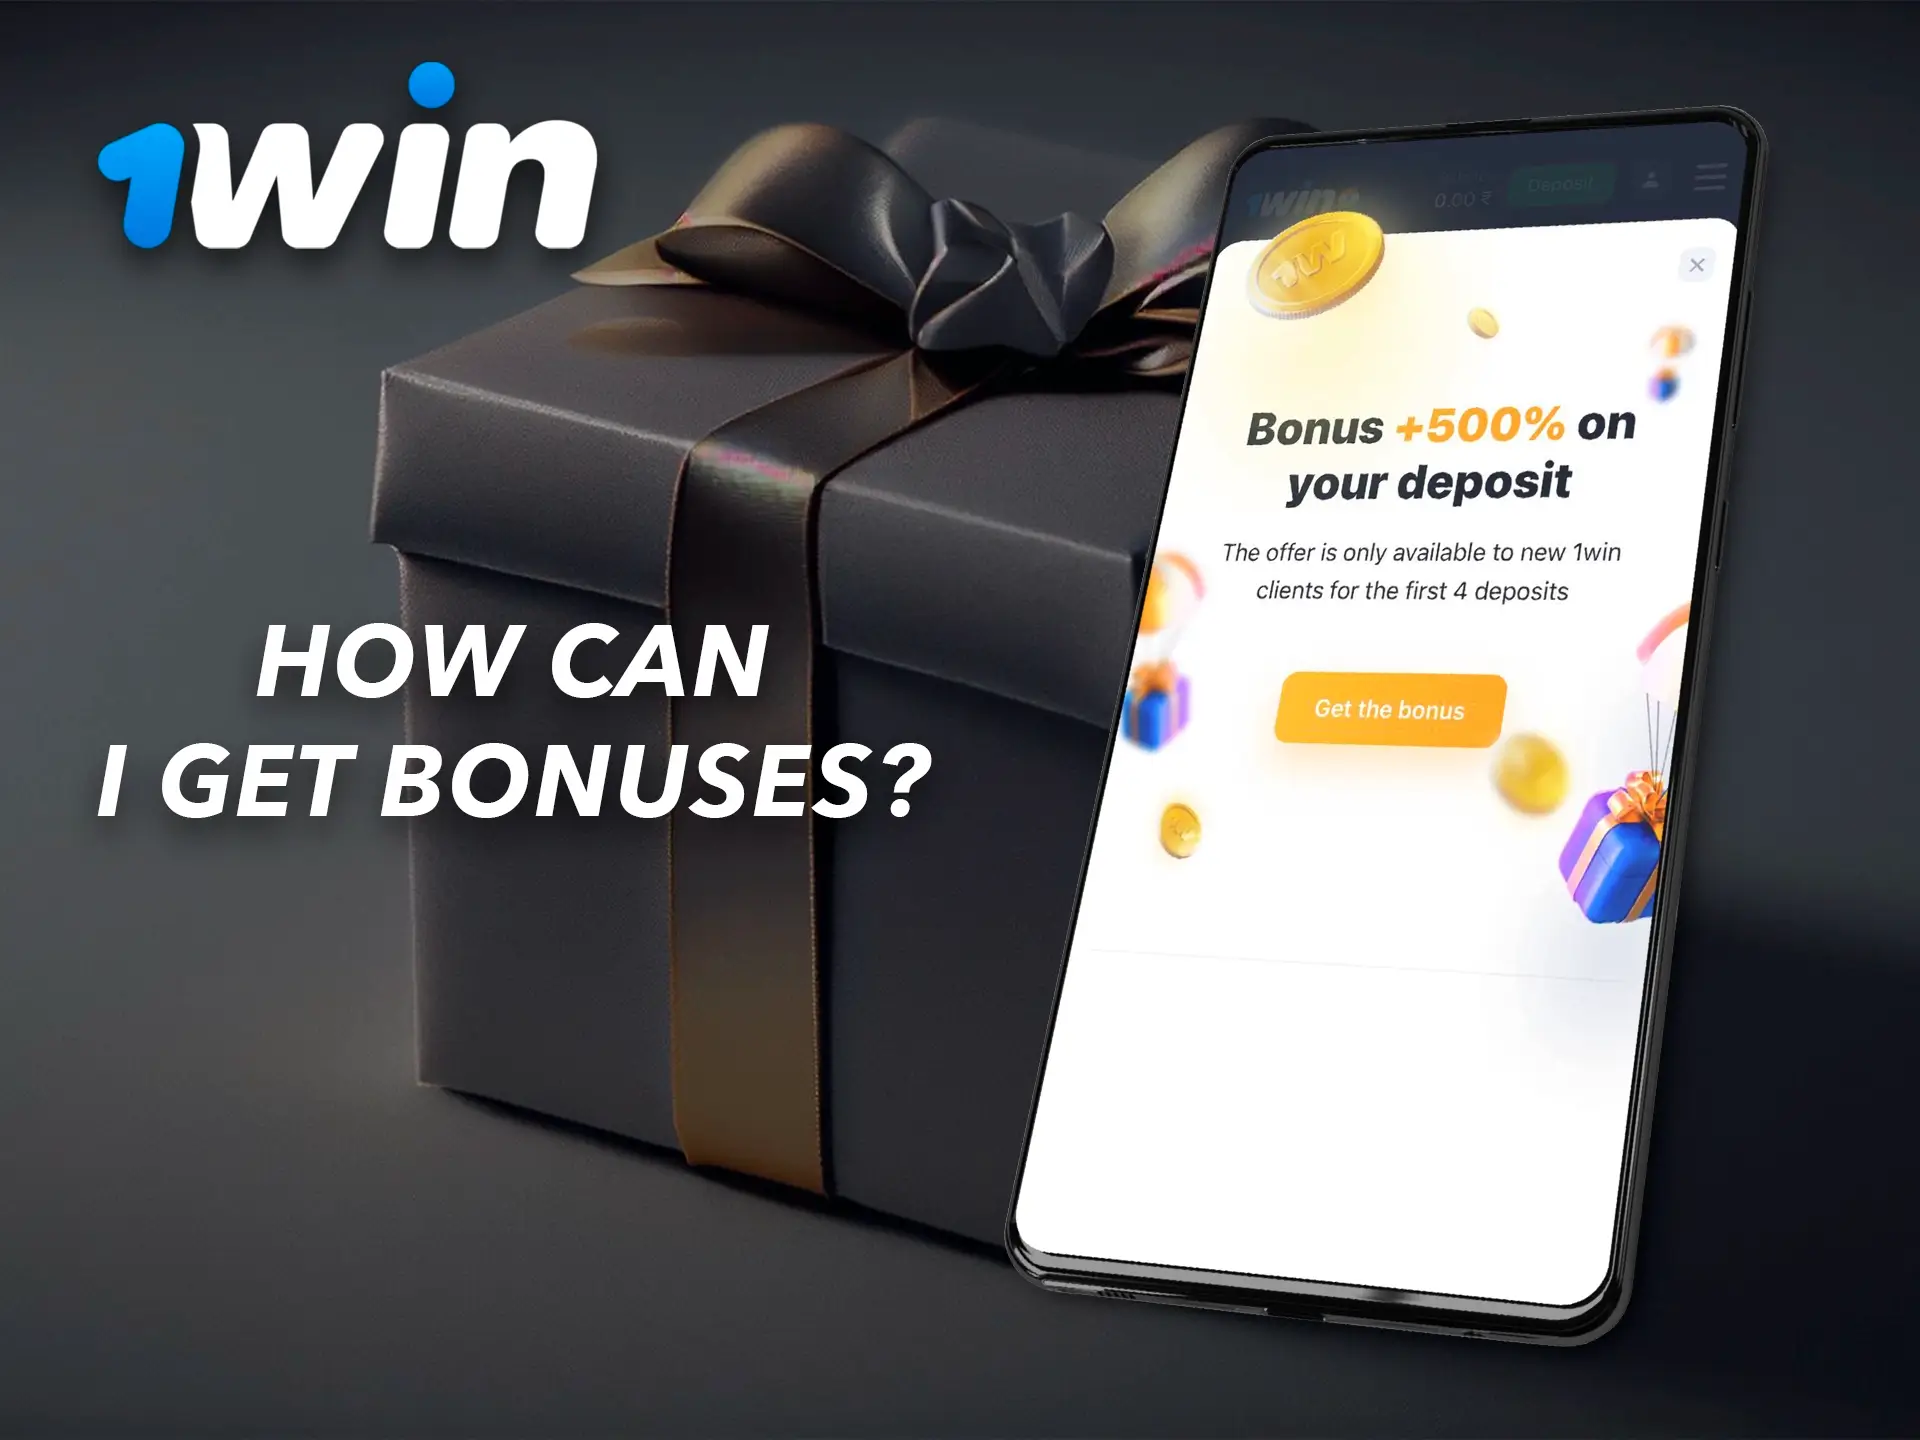 Make your first deposit and your long awaited bonus from 1Win will be immediately available to you.